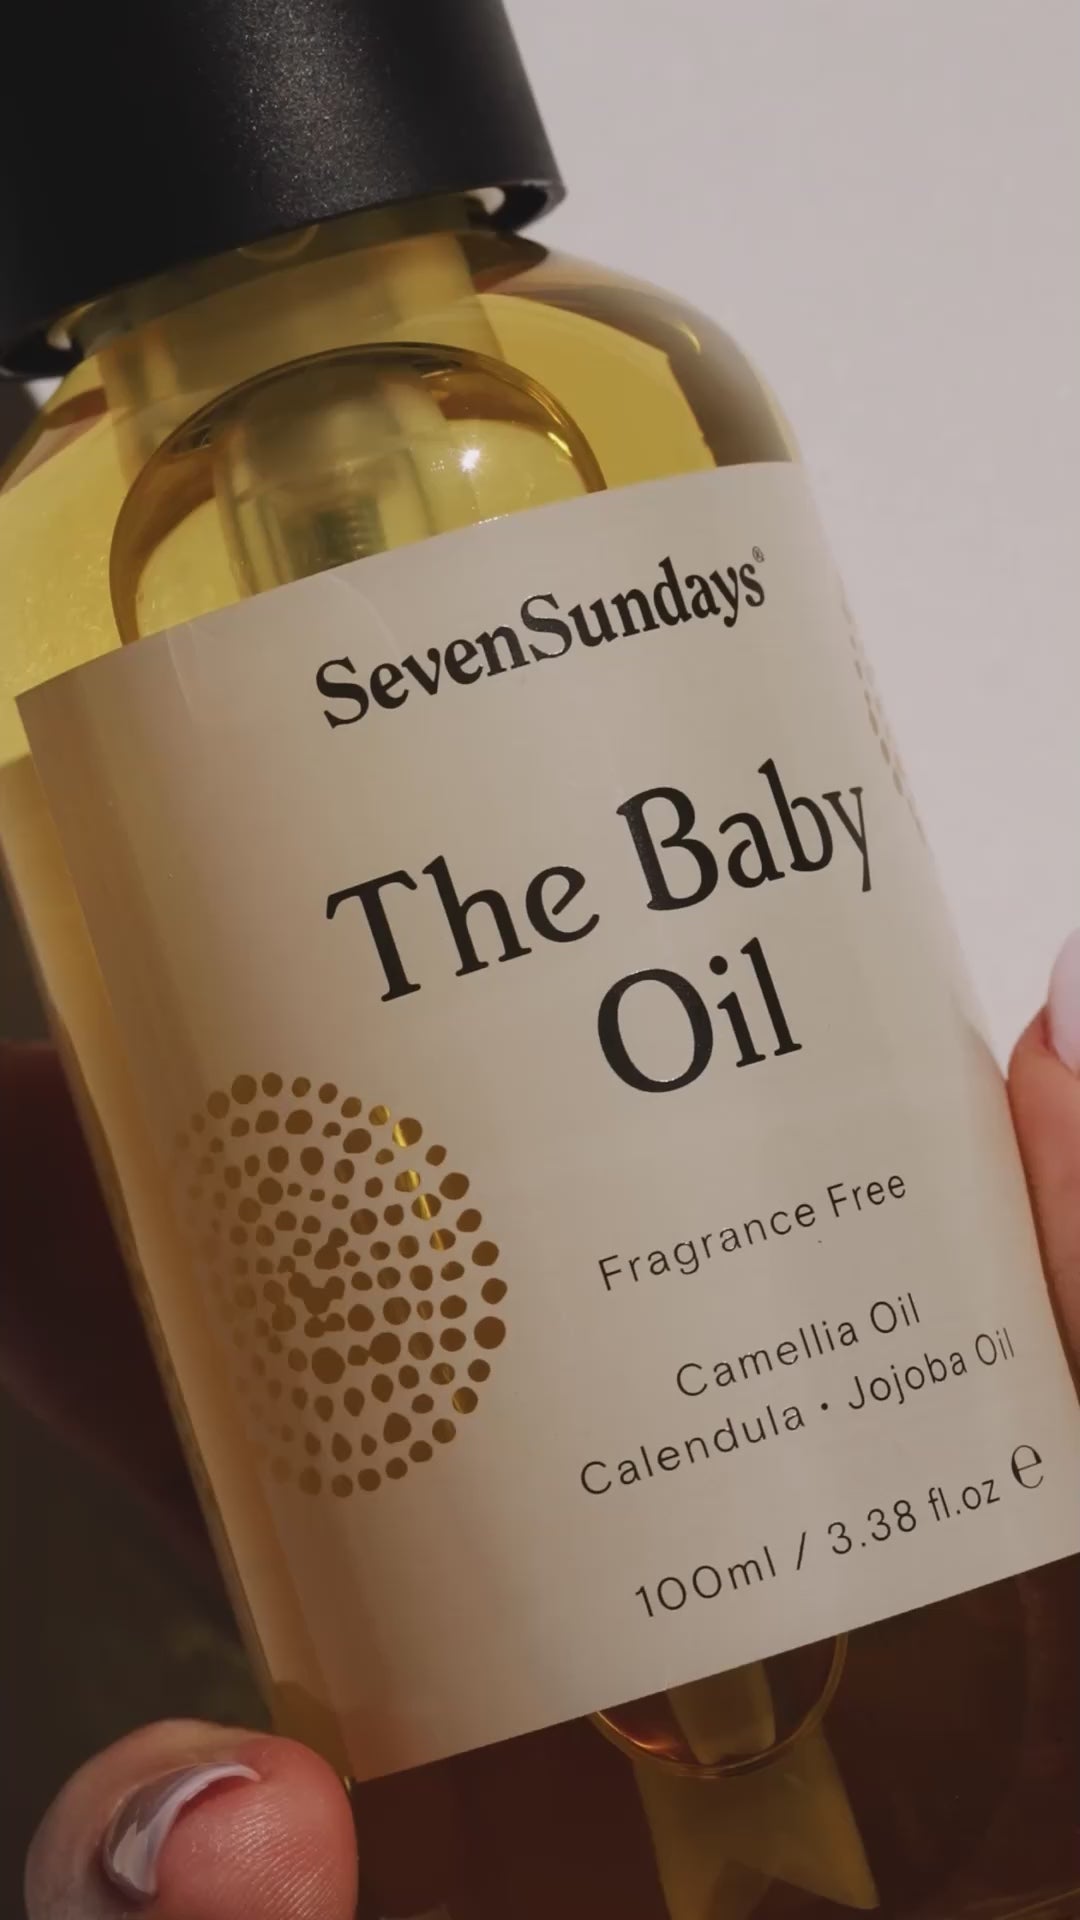 The Baby Oil